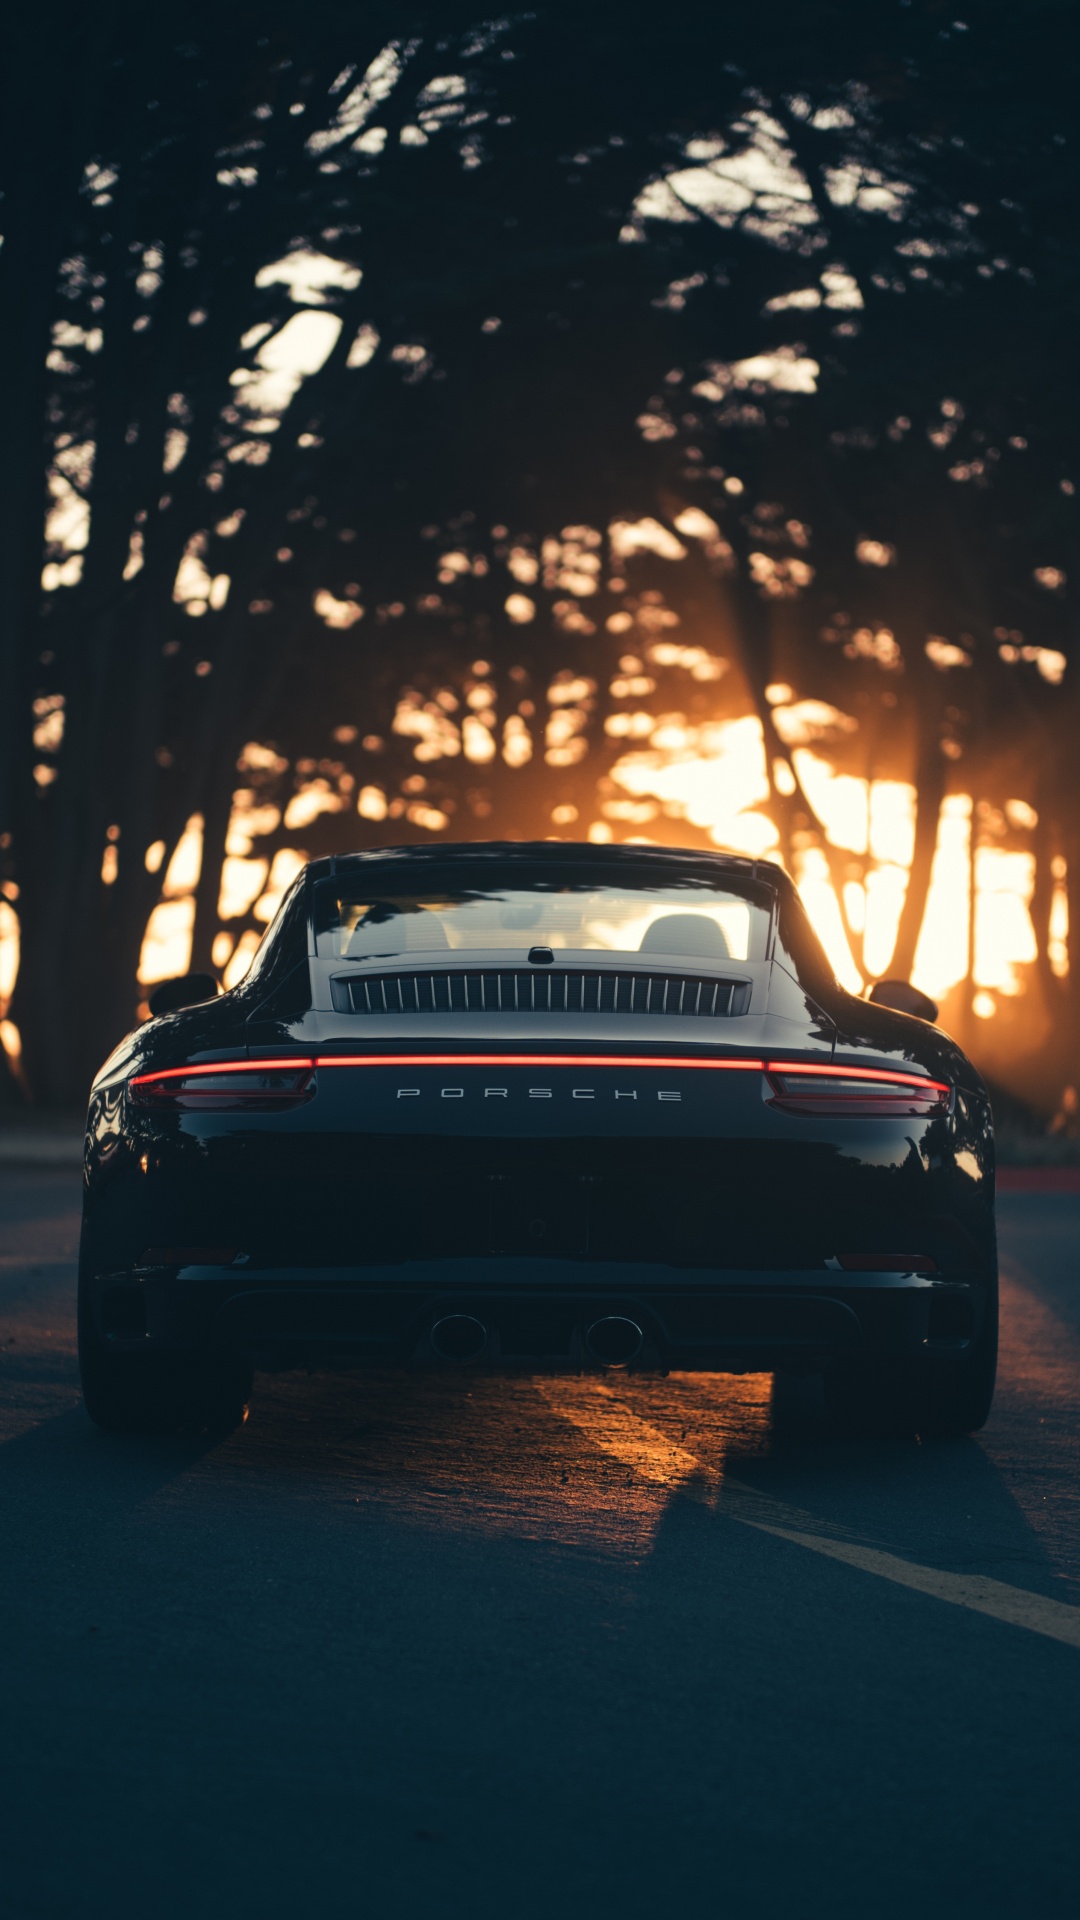 Black Car on Road During Sunset. Wallpaper in 1080x1920 Resolution